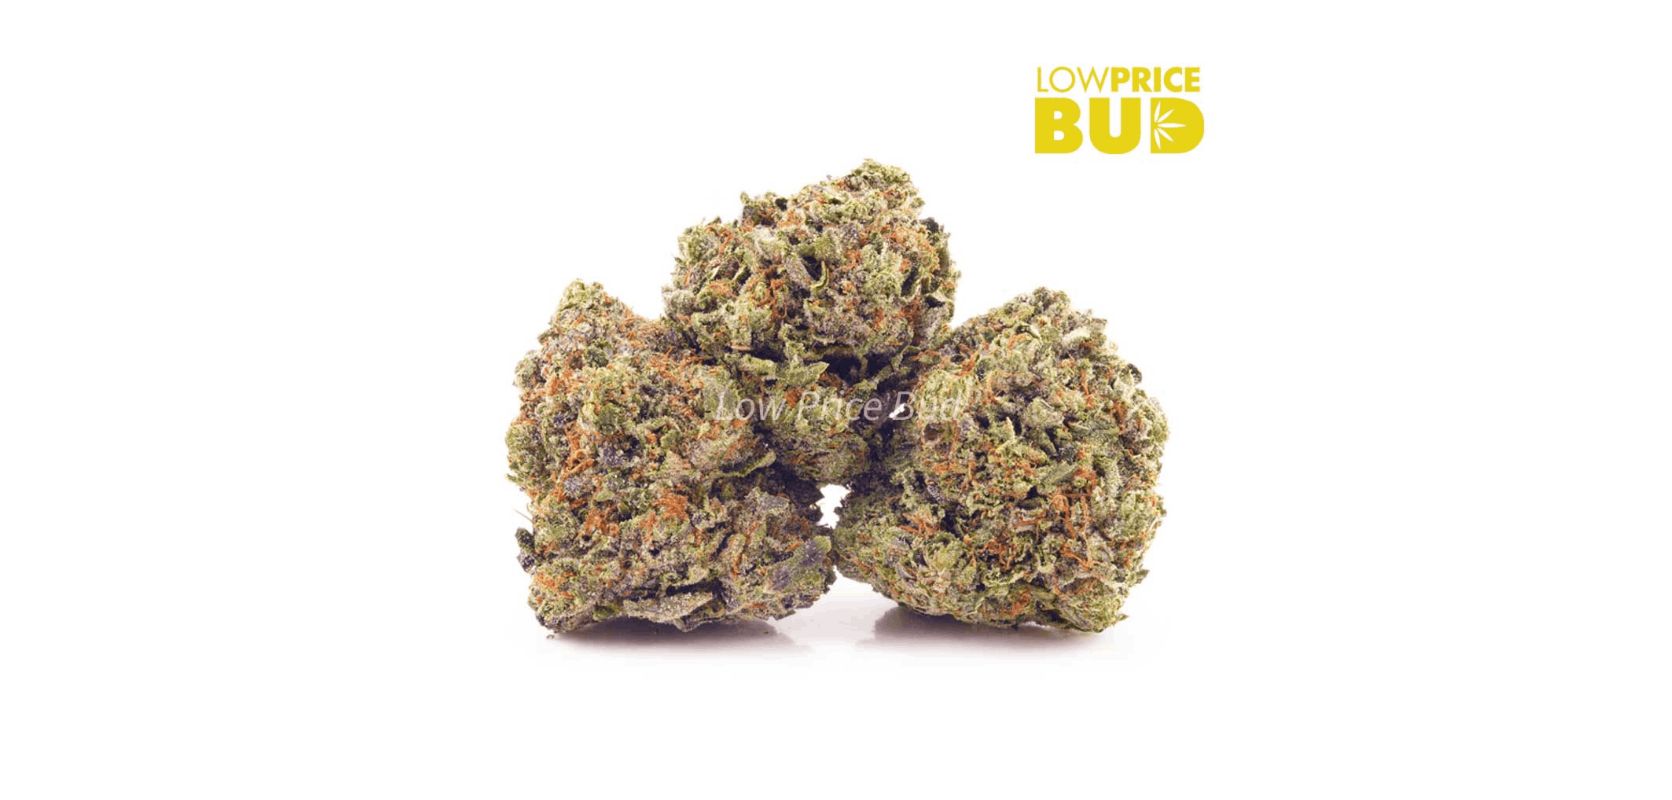 If you're in search of devilish energy and cerebral effects, the El Diablo (AAAA), may be ideal for you! Namely, this is the top-selling mail order marijuana in Canada for recreational and medical users seeking a full blast of cerebral rush.